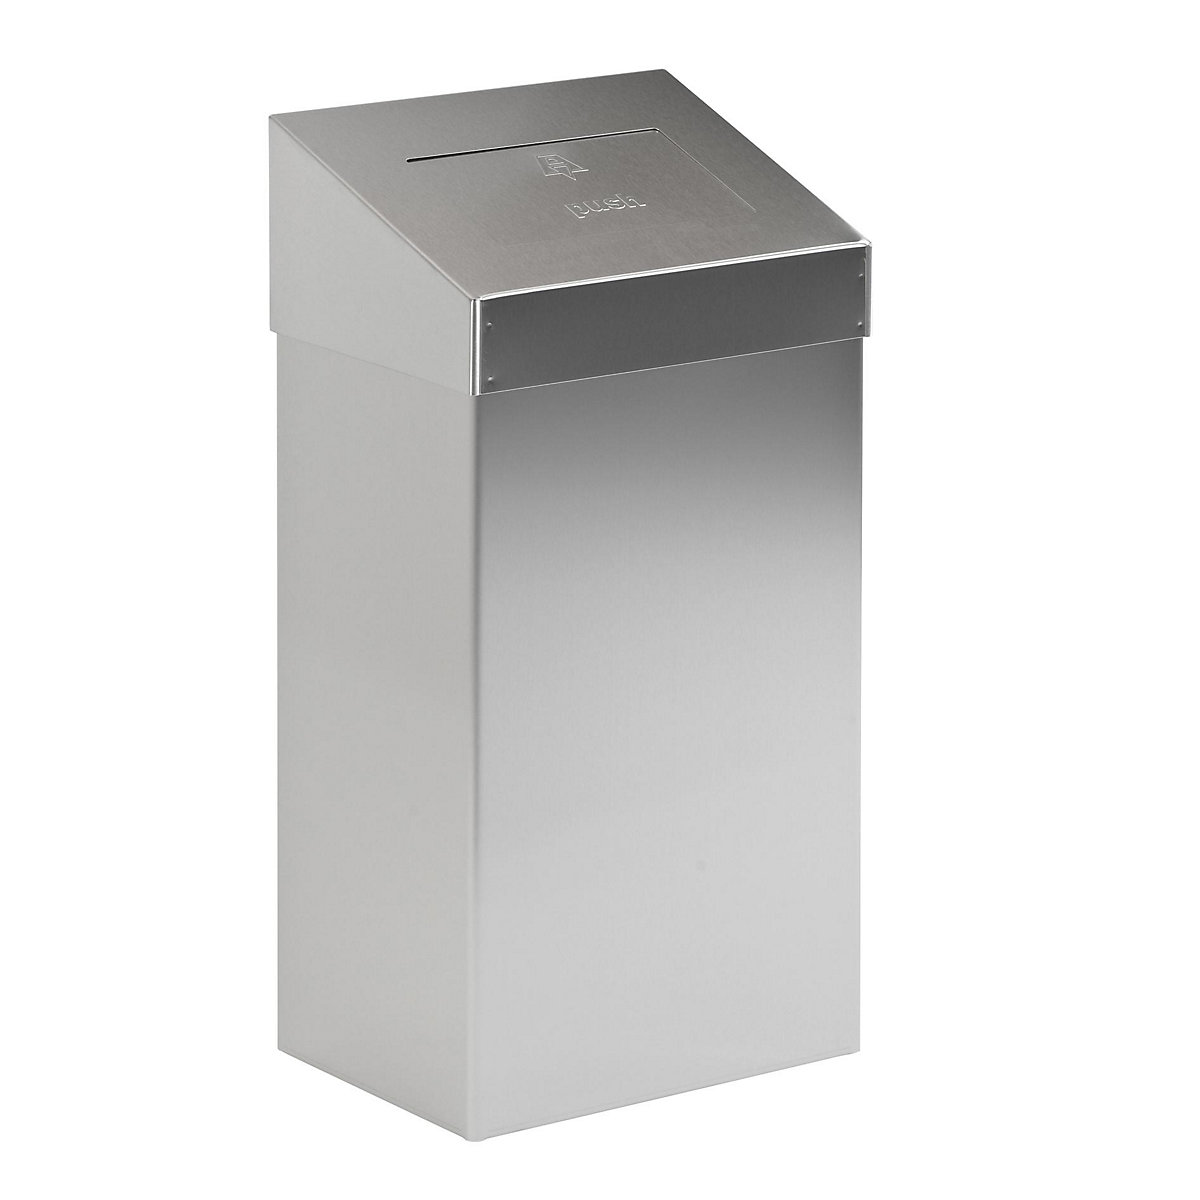 Waste collector with push lid, capacity 18 l, WxHxD 277 x 500 x 170 mm, stainless steel, matt finish-1